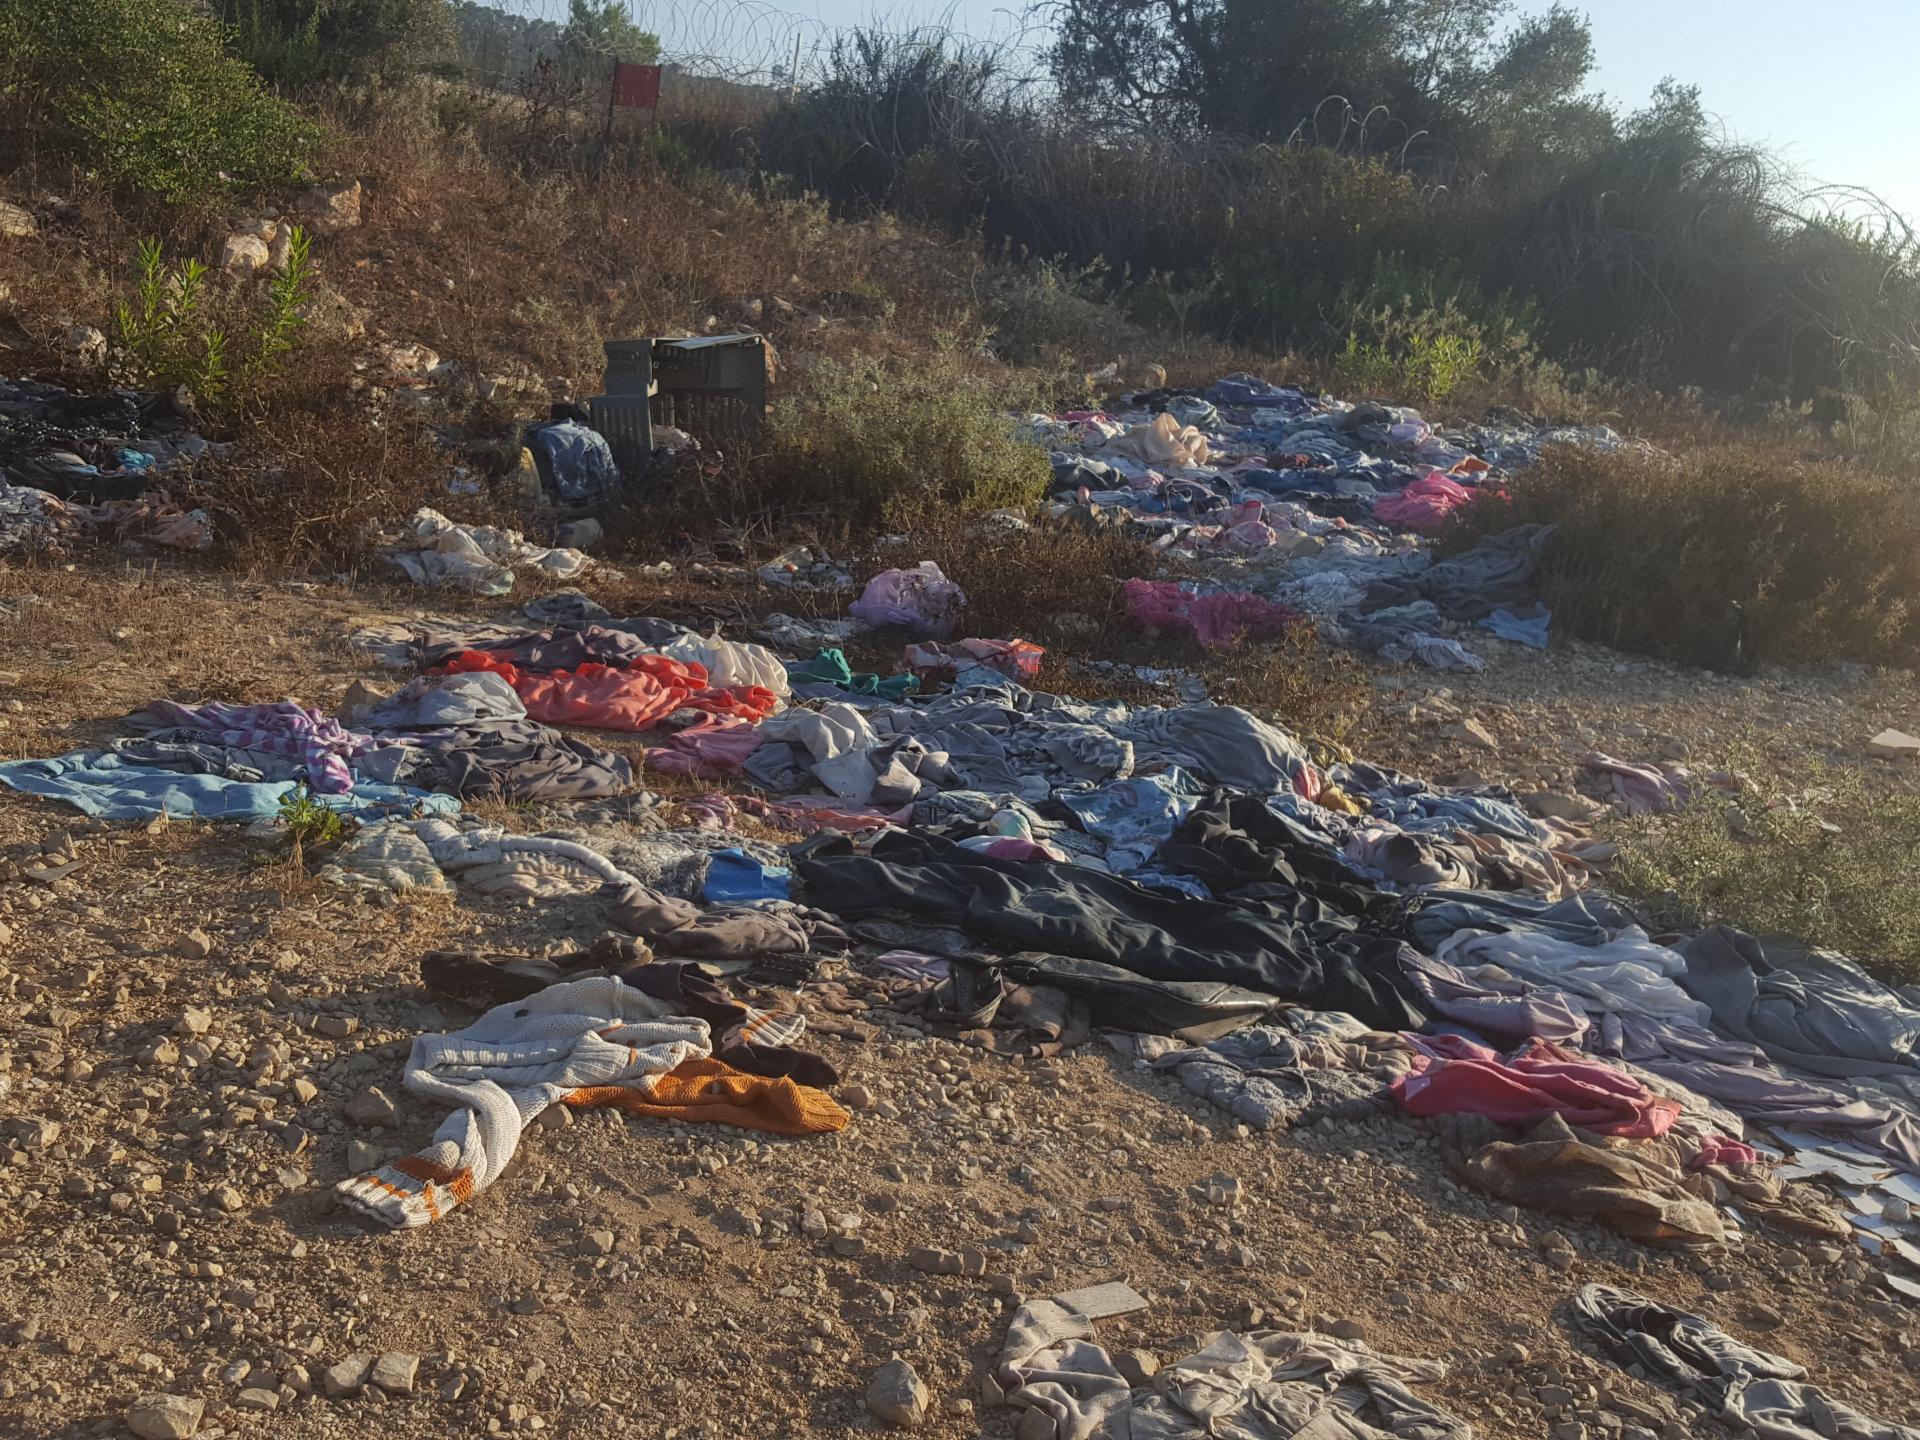 ​‘Aneen Checkpoint 11.7.18 – Clothes (that we gave to people) thrown at the olive grove near to the checkpoint